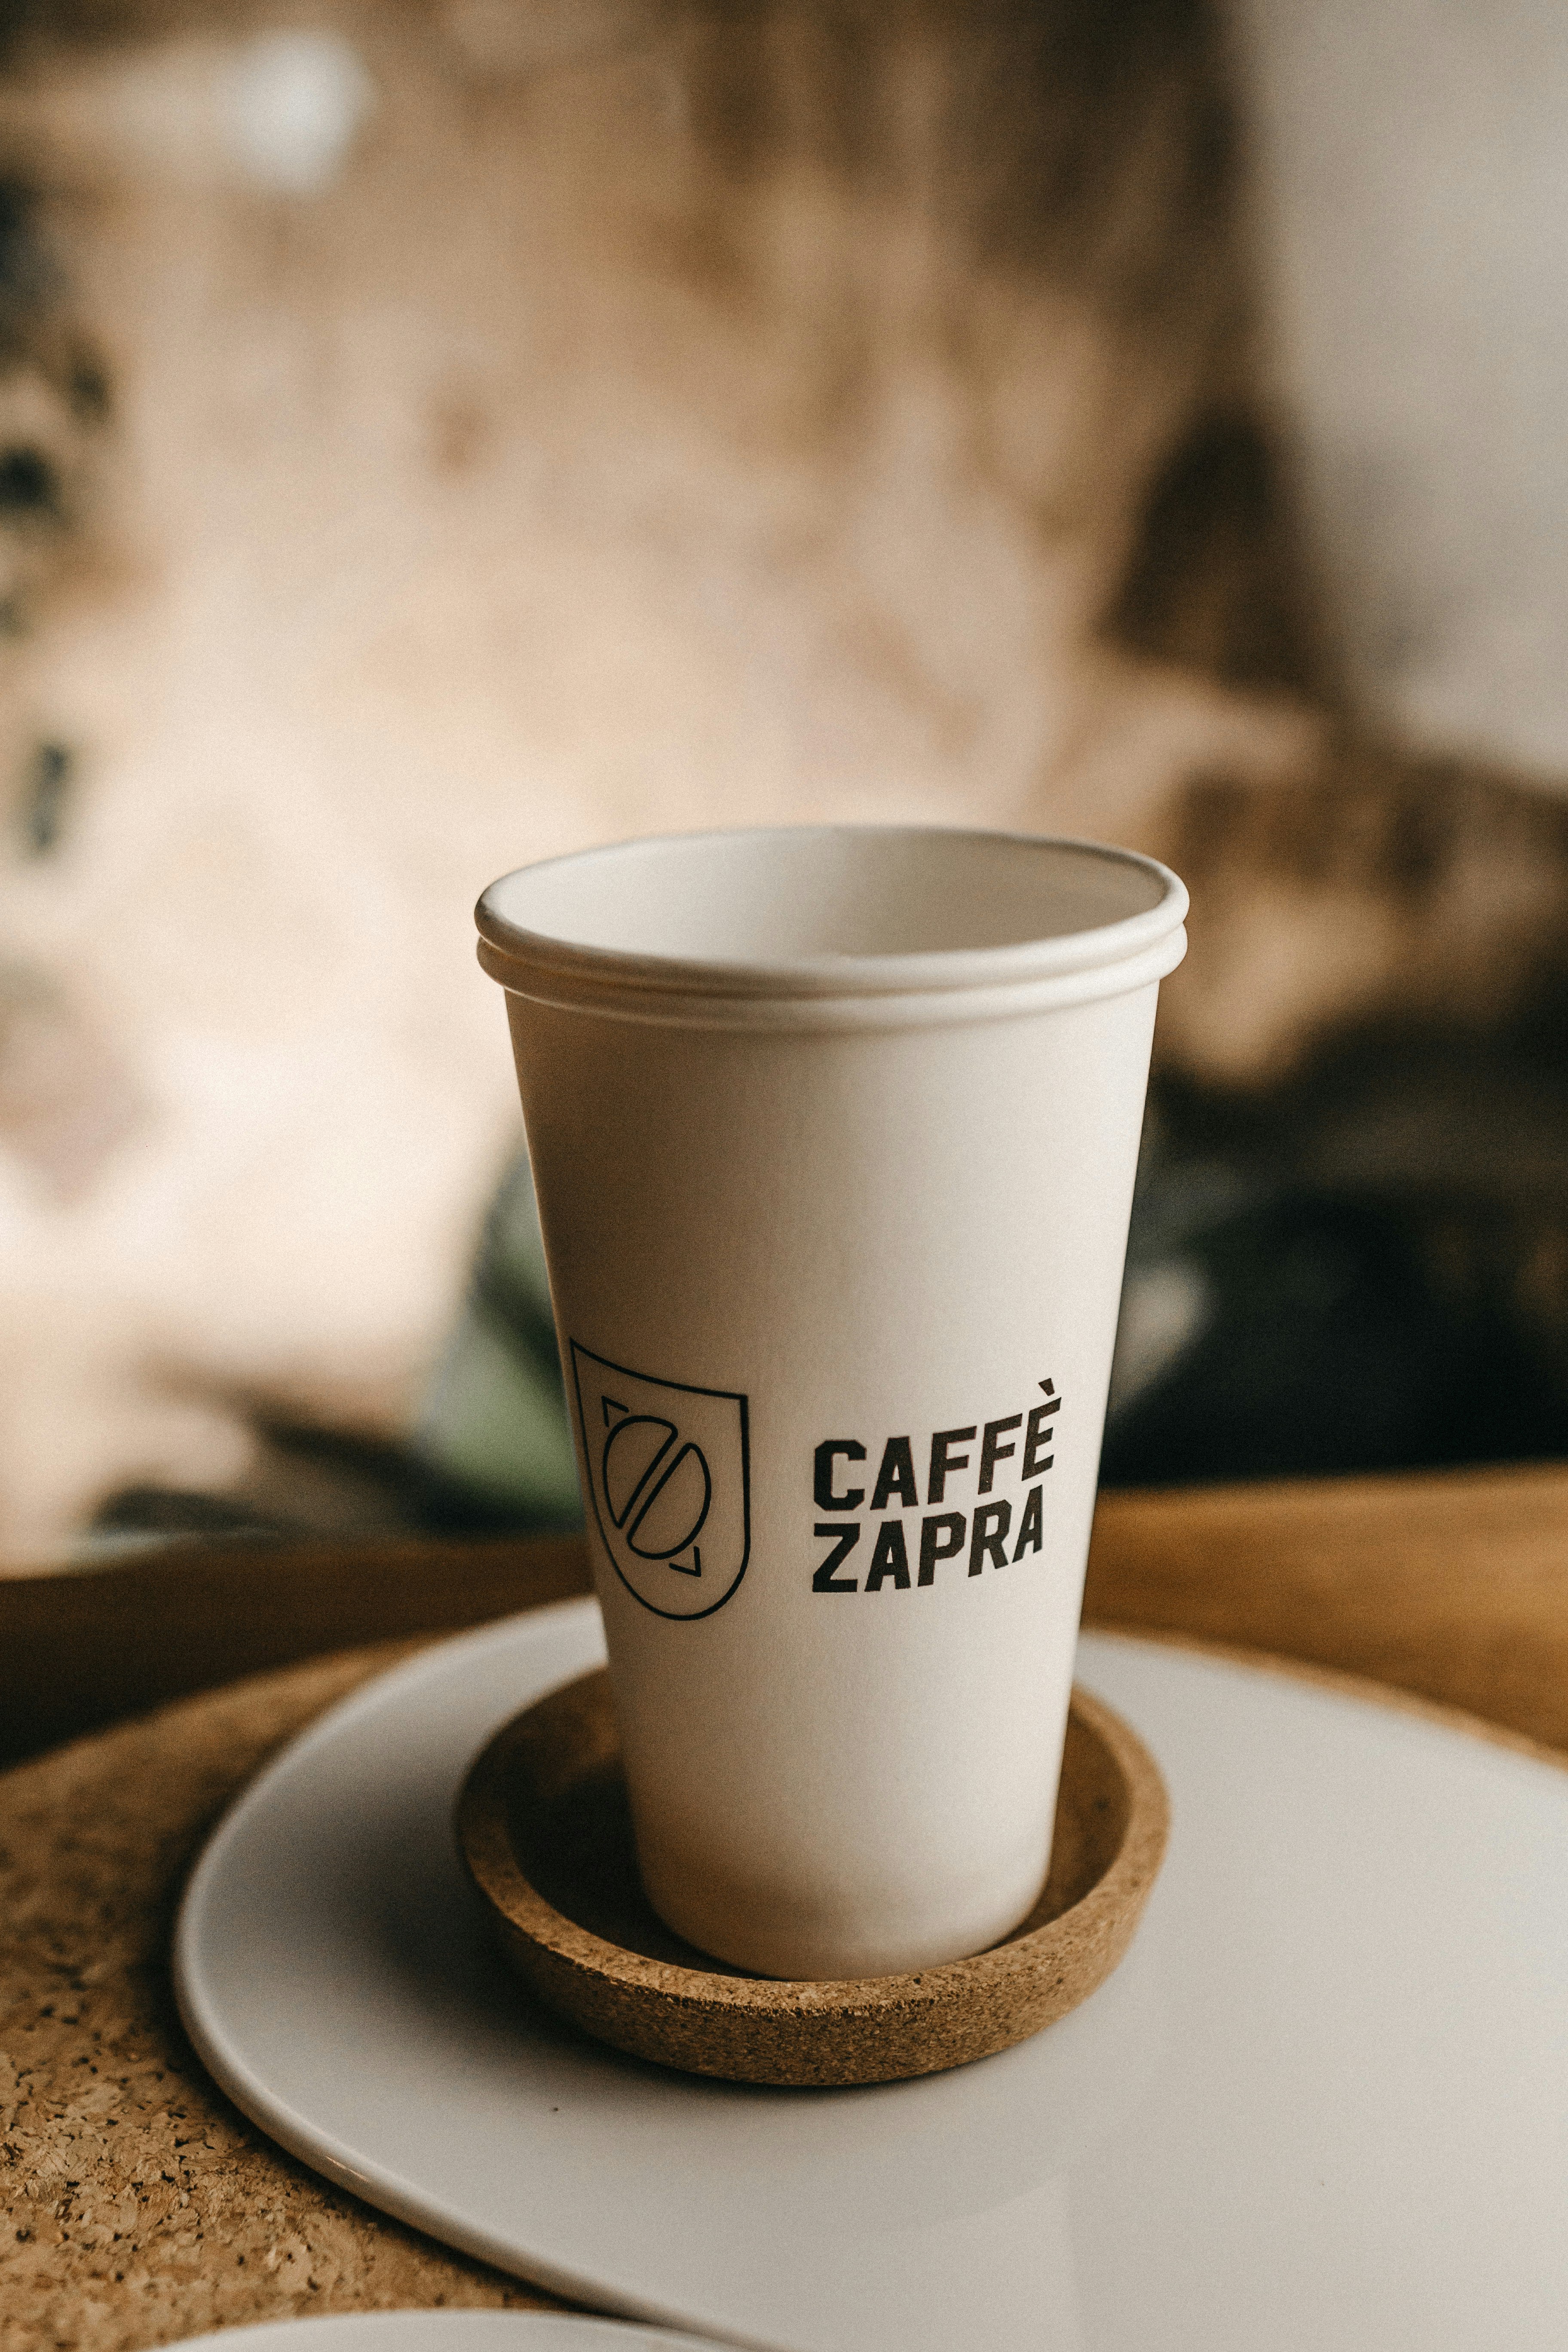 white and black Caffe Zapra cup on table